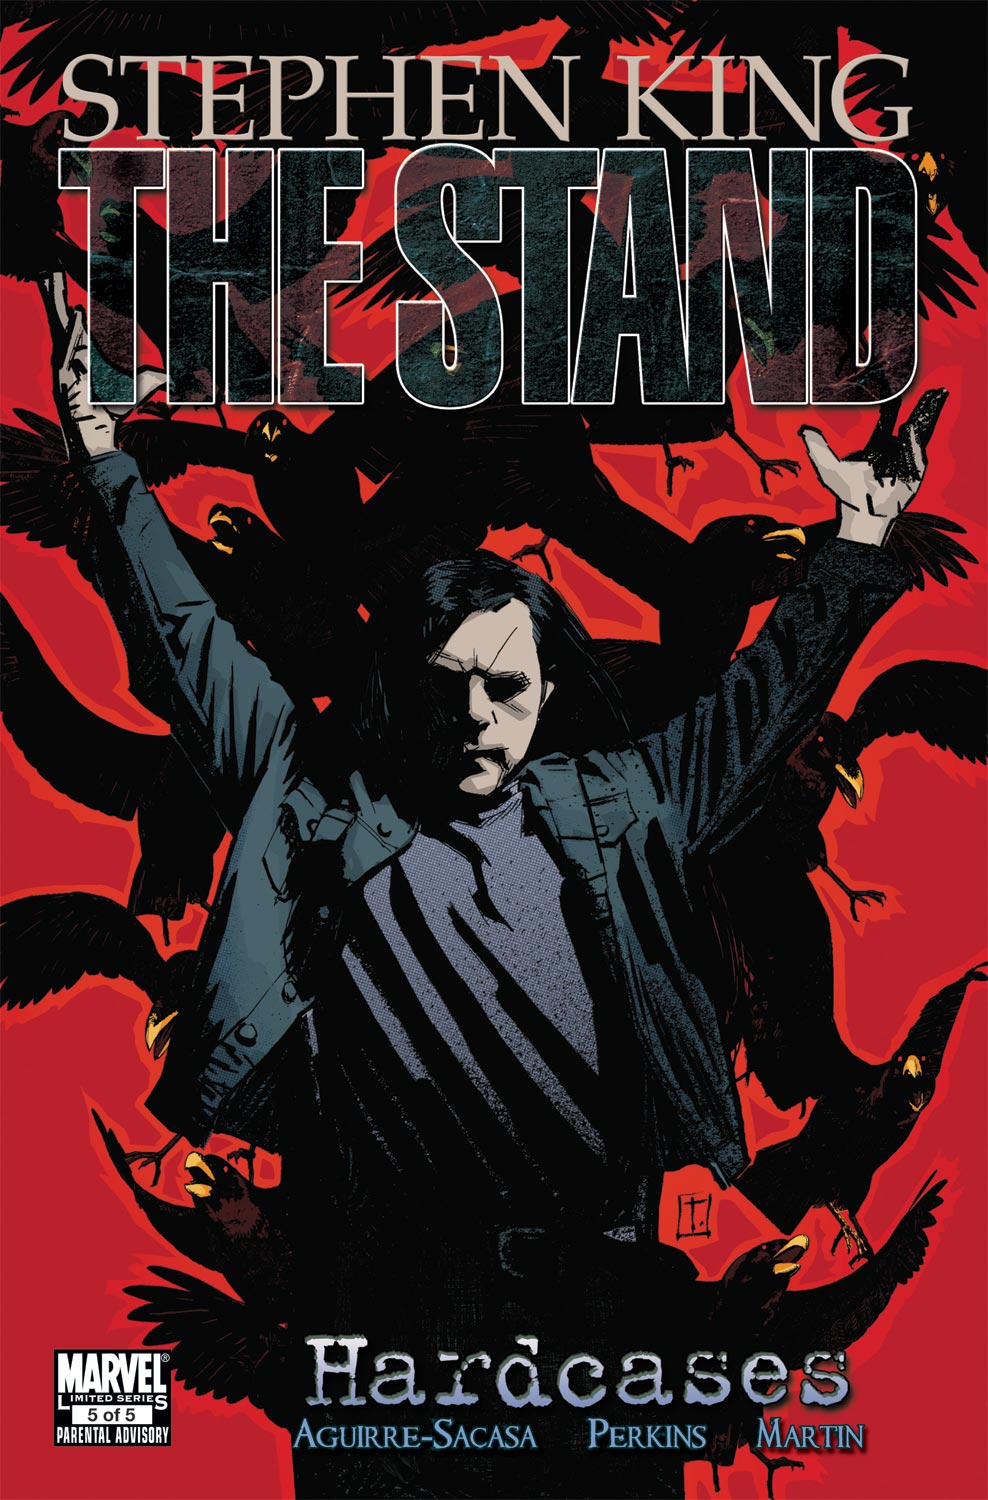 The Stand: Hardcases (2010) #5